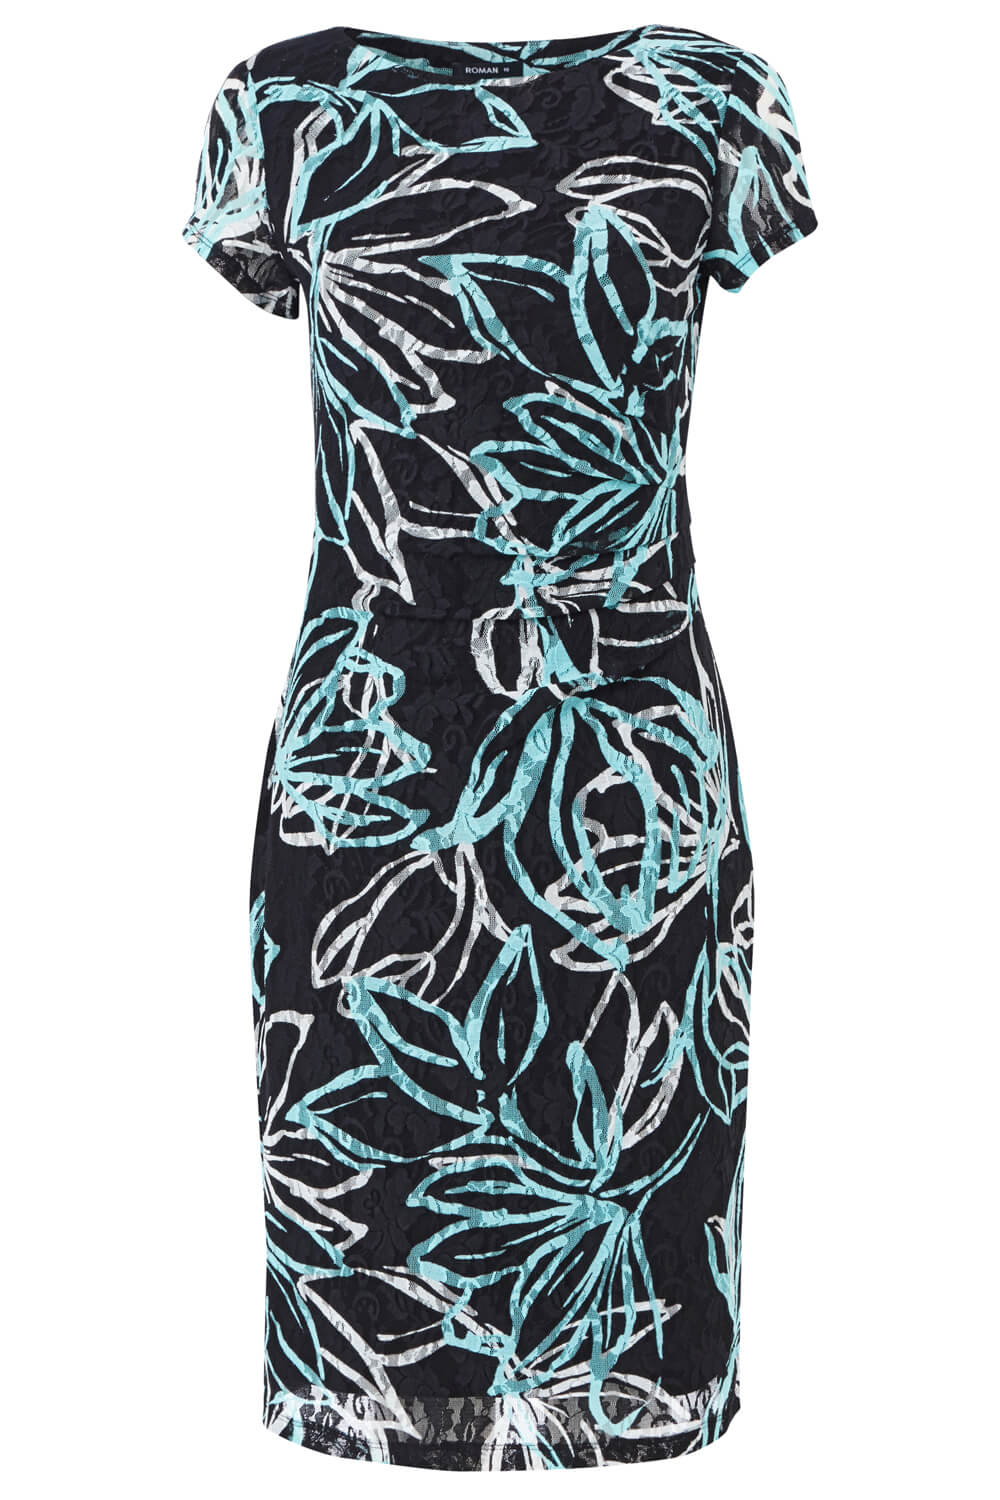 Turquoise Floral Lace Ruched Dress, Image 5 of 5